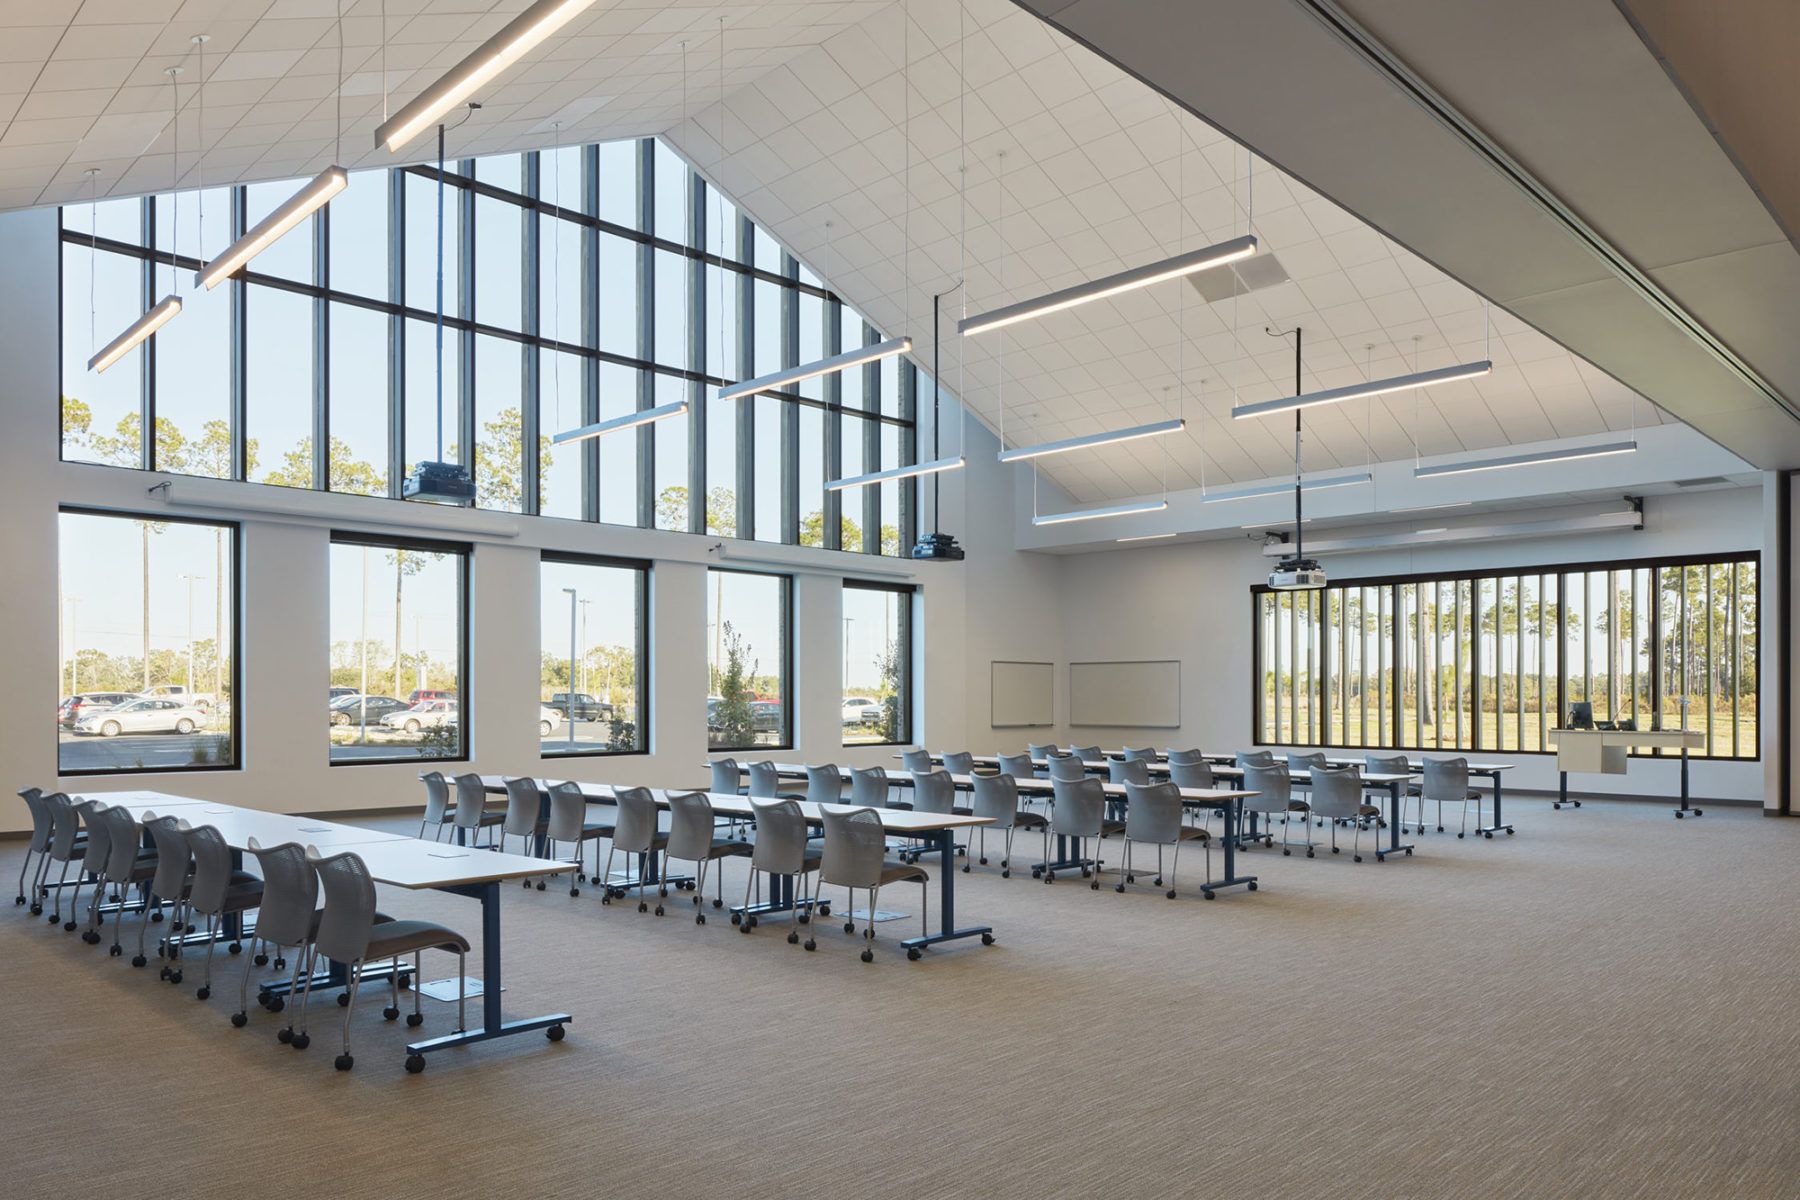 large classroom with operable partitions opens into an even larger learning space